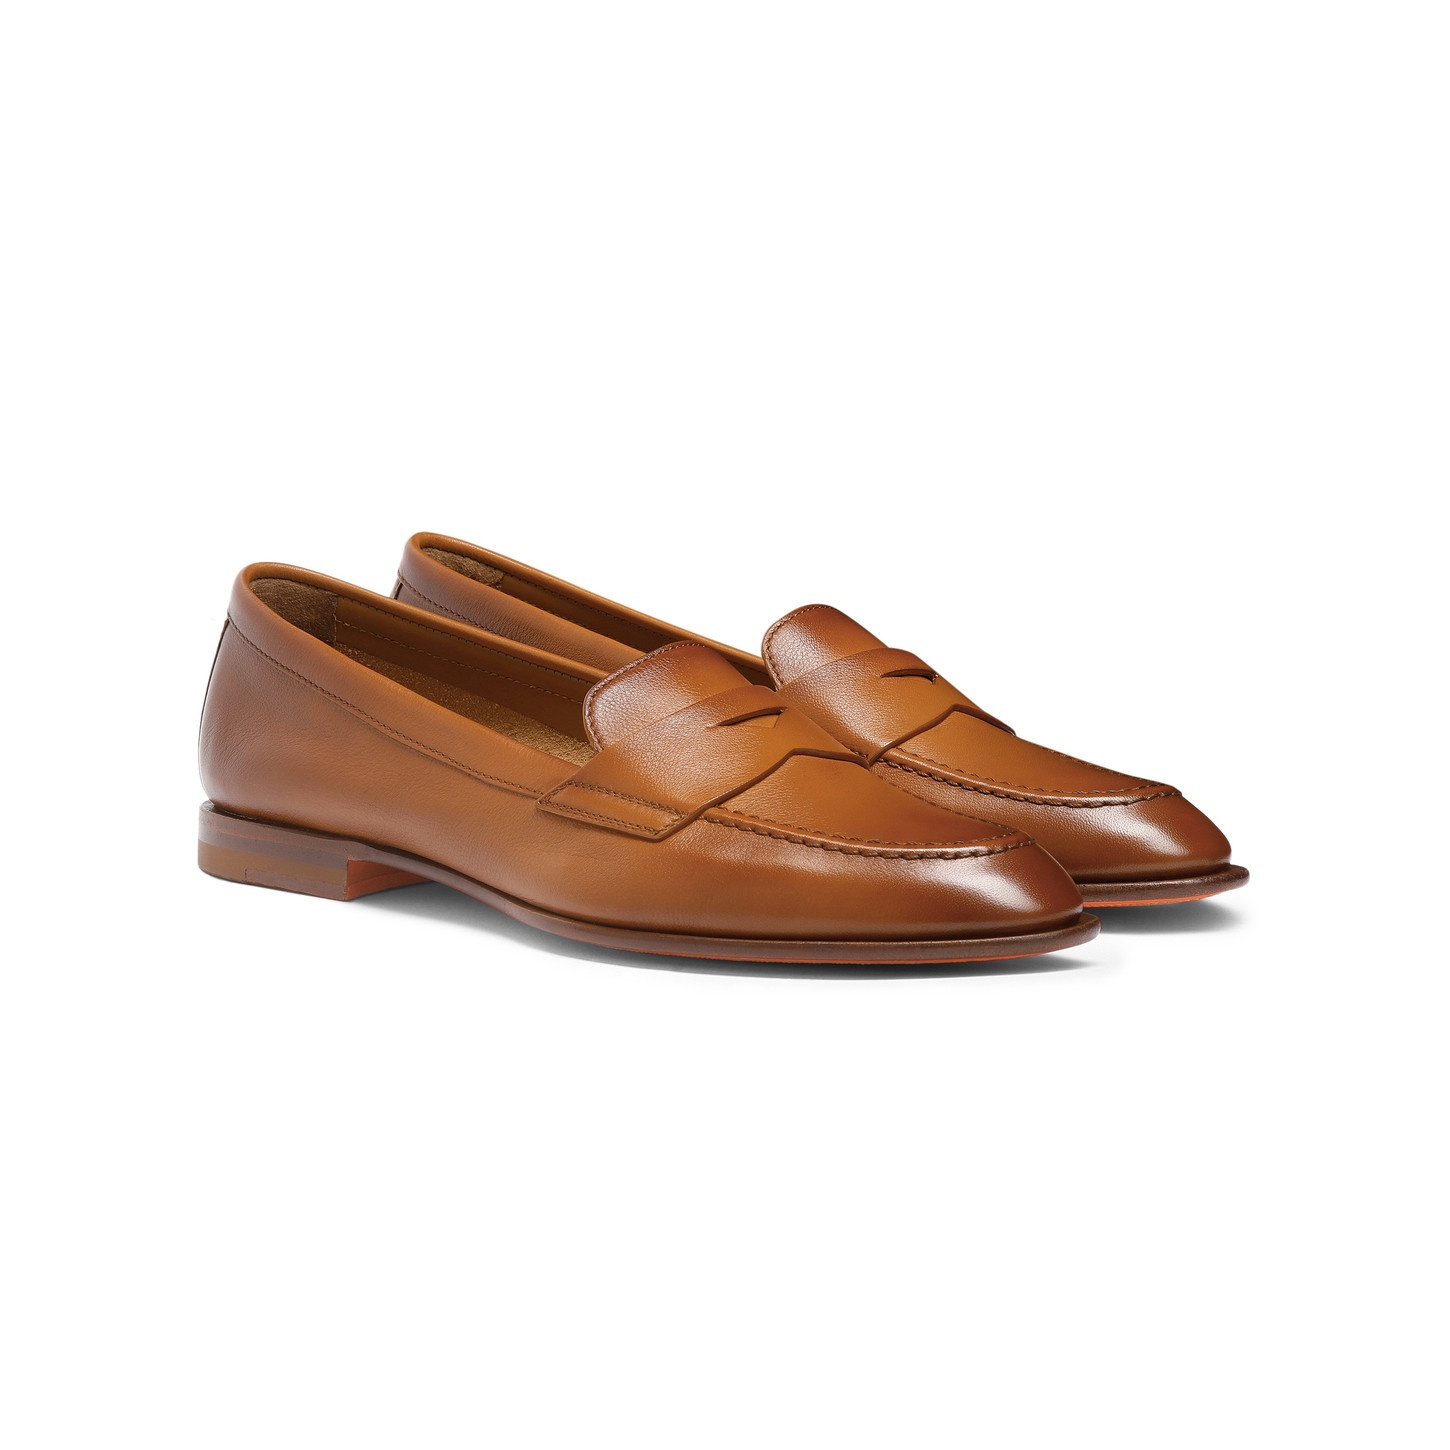 Women’s brown leather penny loafer - 3